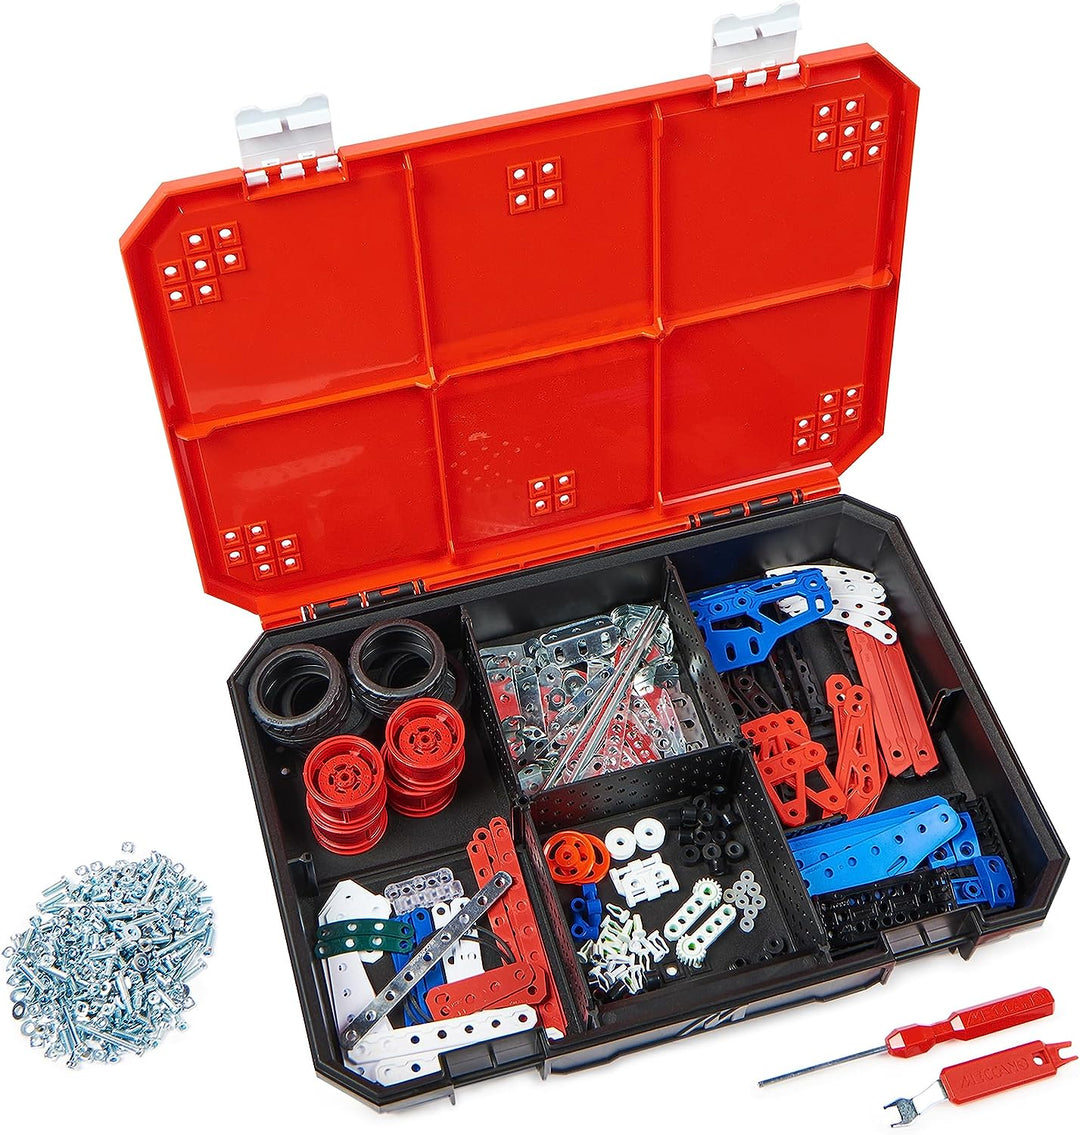 MECCANO Maker’s Toolbox, 437-Piece Intermediate STEAM Model-Building Kit for Open-Ended Play